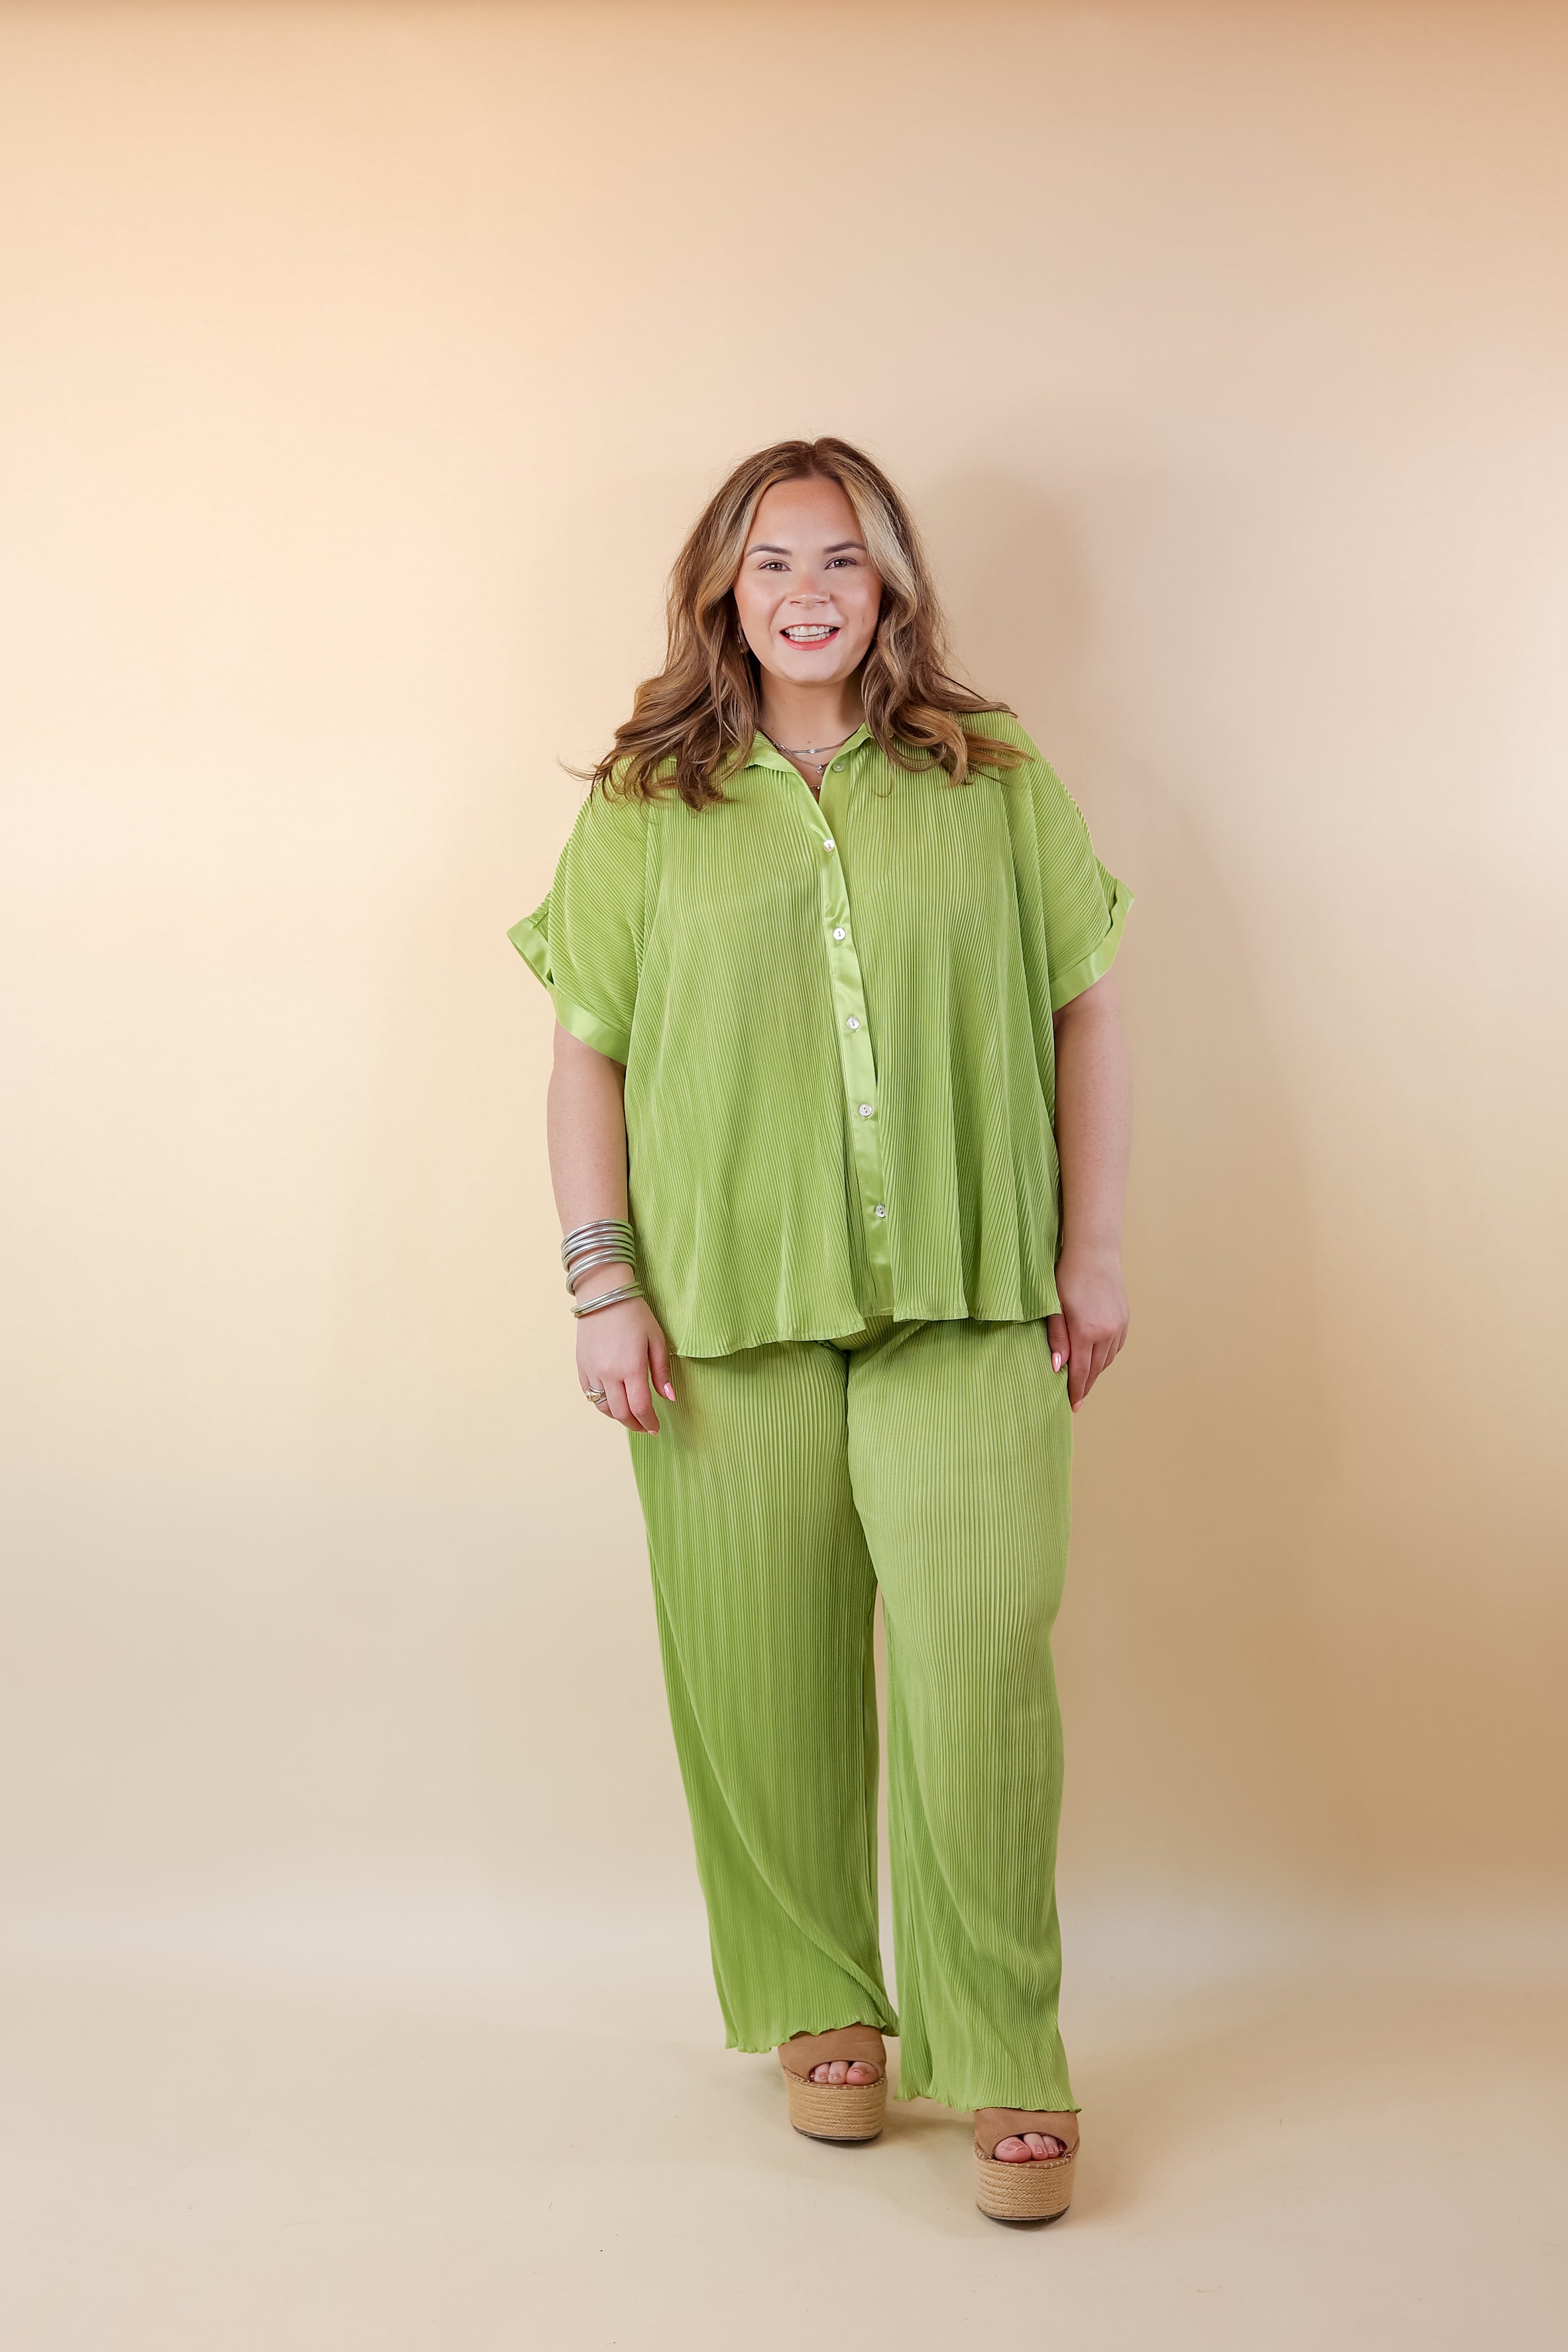 Walking In Paradise Plissé Drawstring Pants in Lime Green - Giddy Up Glamour Boutique